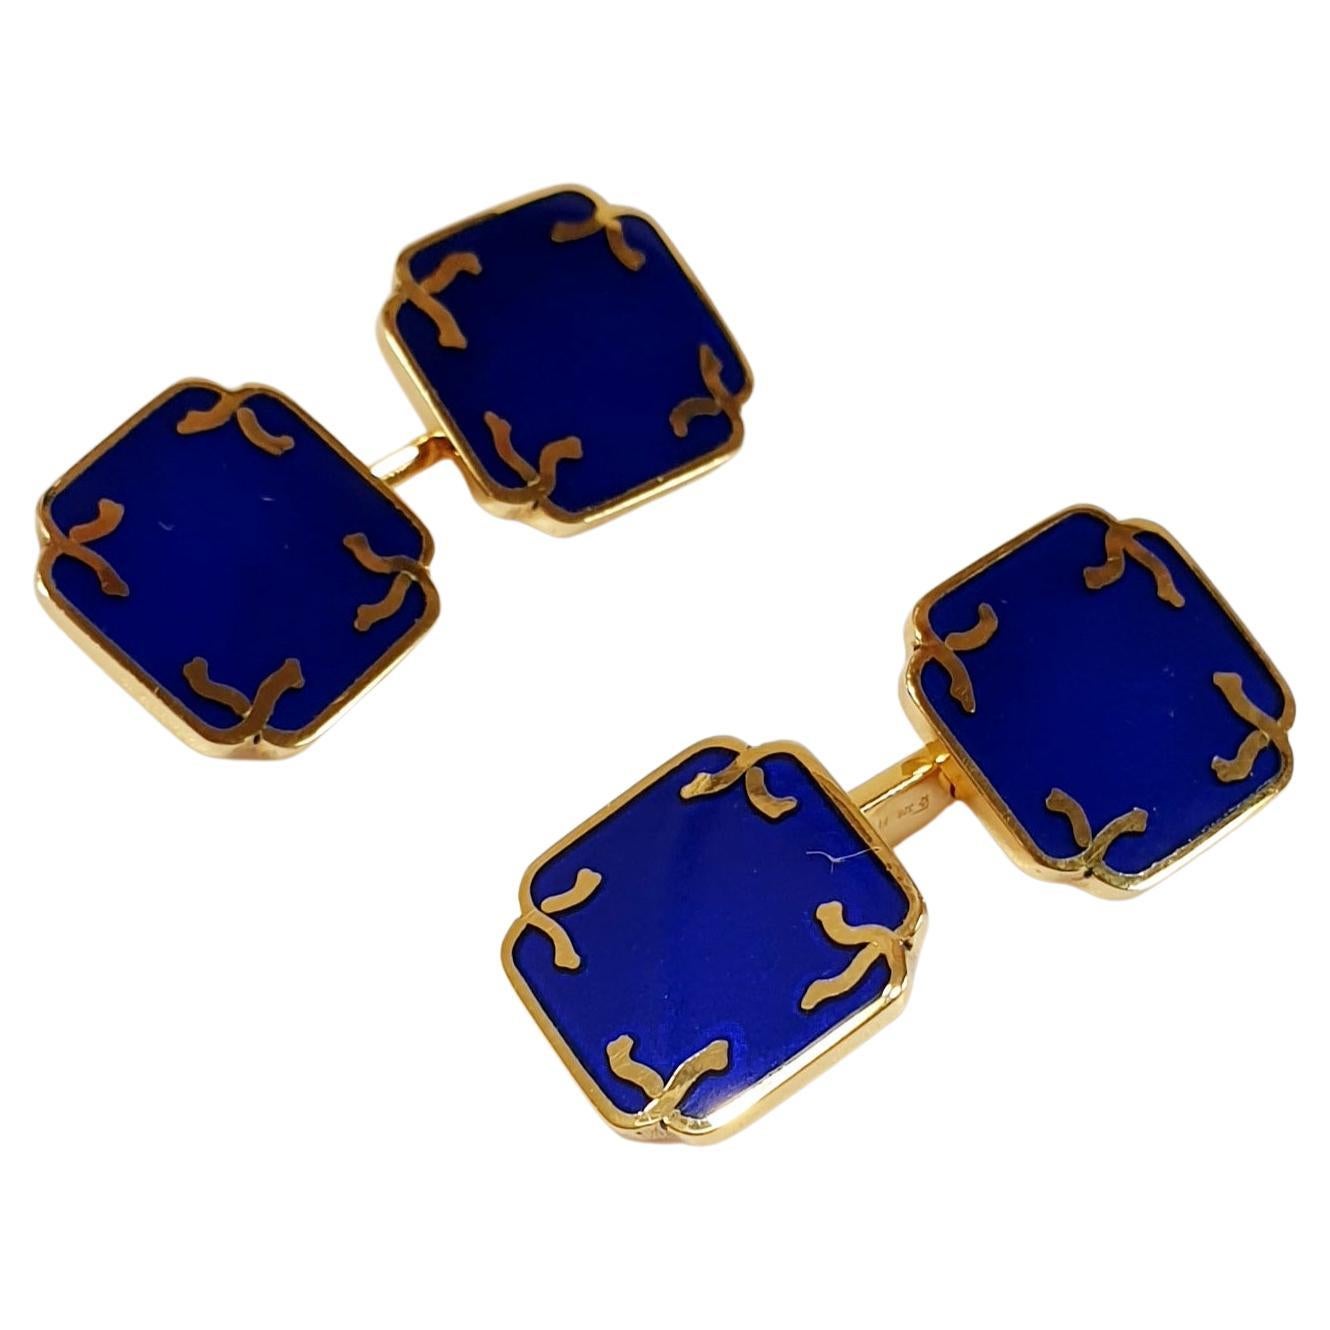 Vintage cufflinks in yellow gold and blue enamel
Cufflinks, a watch and a tie have always been distinctive signs of a true gentleman, since luxury is achieved.
The 